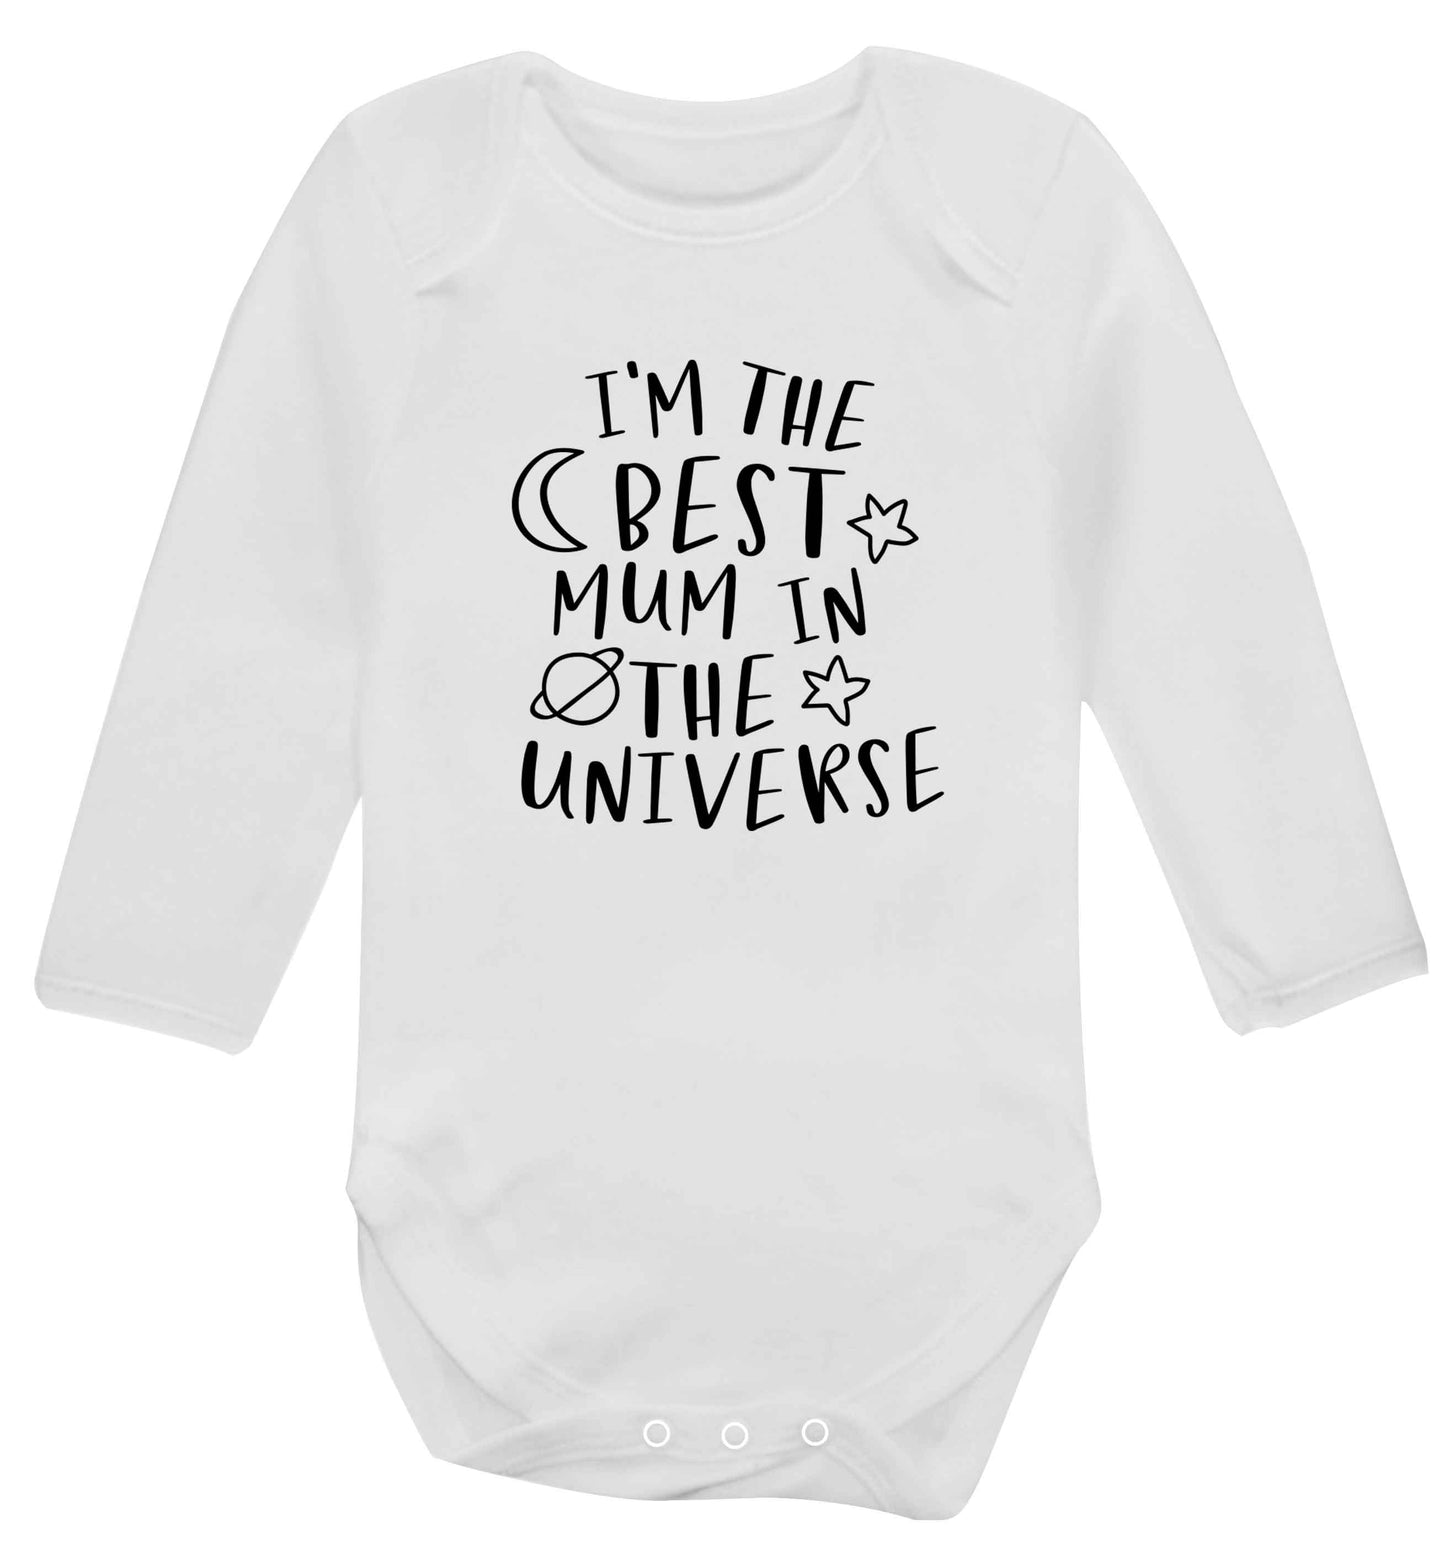 I'm the best mum in the universe baby vest long sleeved white 6-12 months